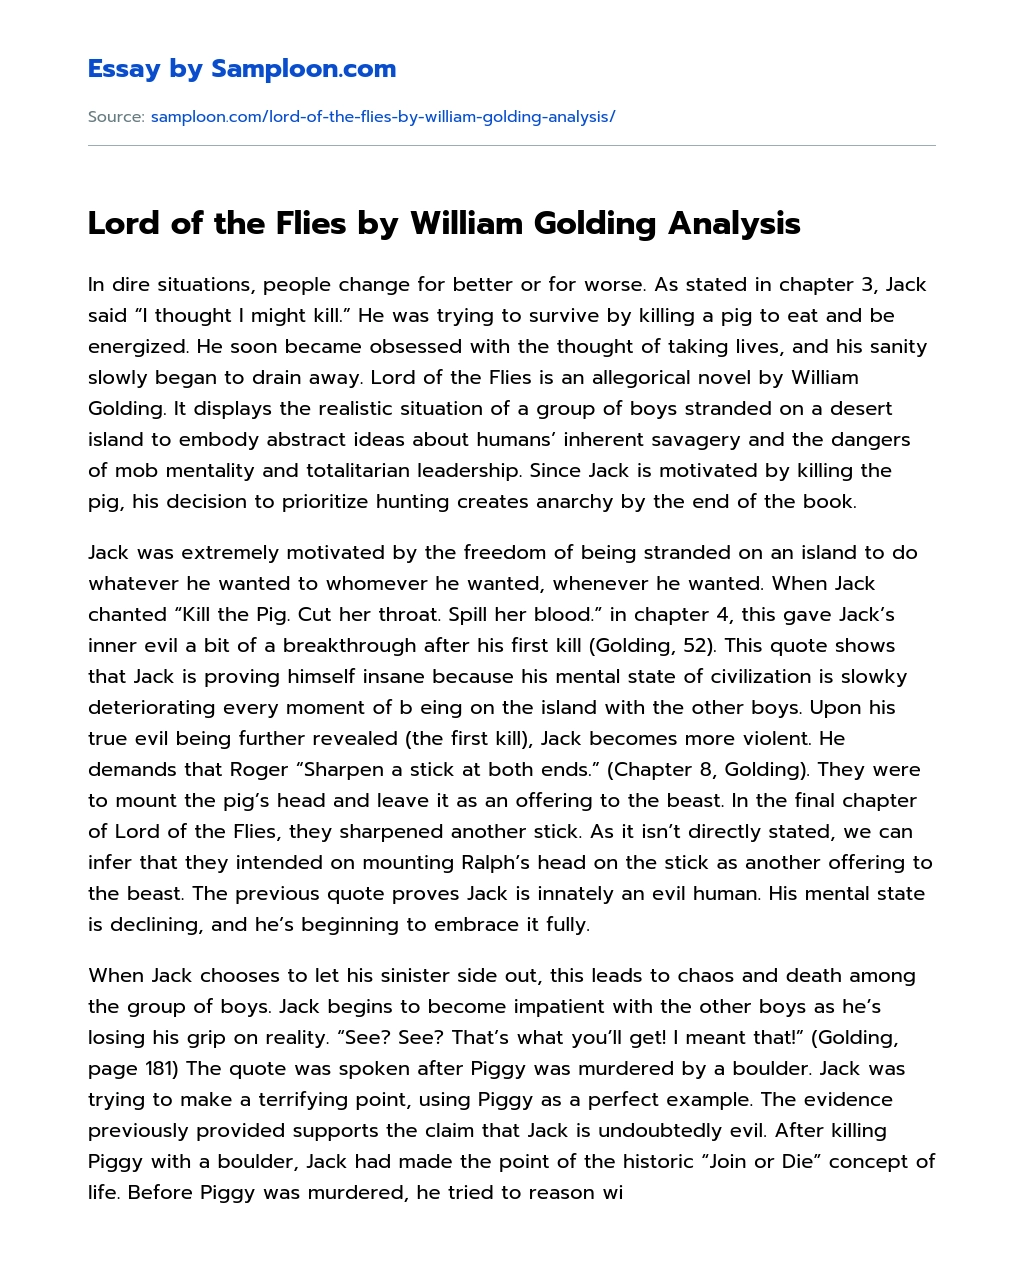 Lord of the Flies by William Golding Analysis essay